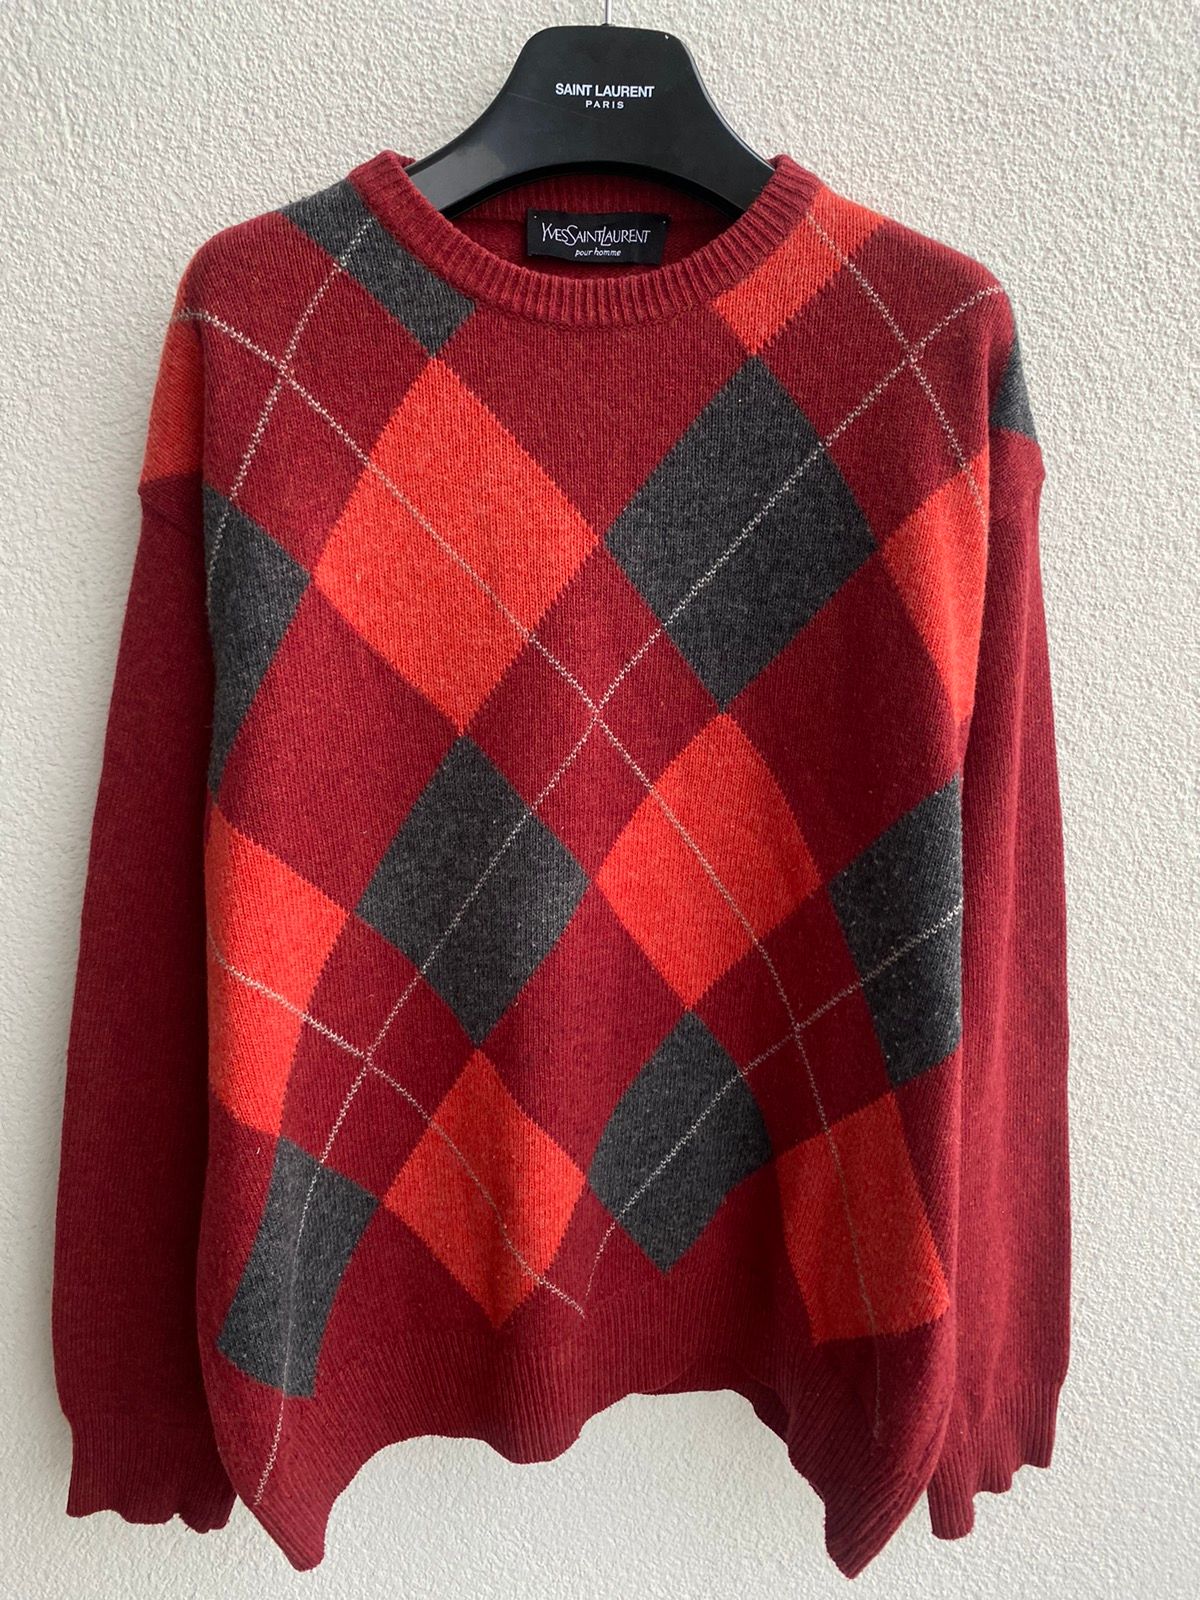 Vintage 🇮🇹italy 90’s YSL Sweater Wool Knit Soft Size US L / EU 52-54 / 3 - 2 Preview